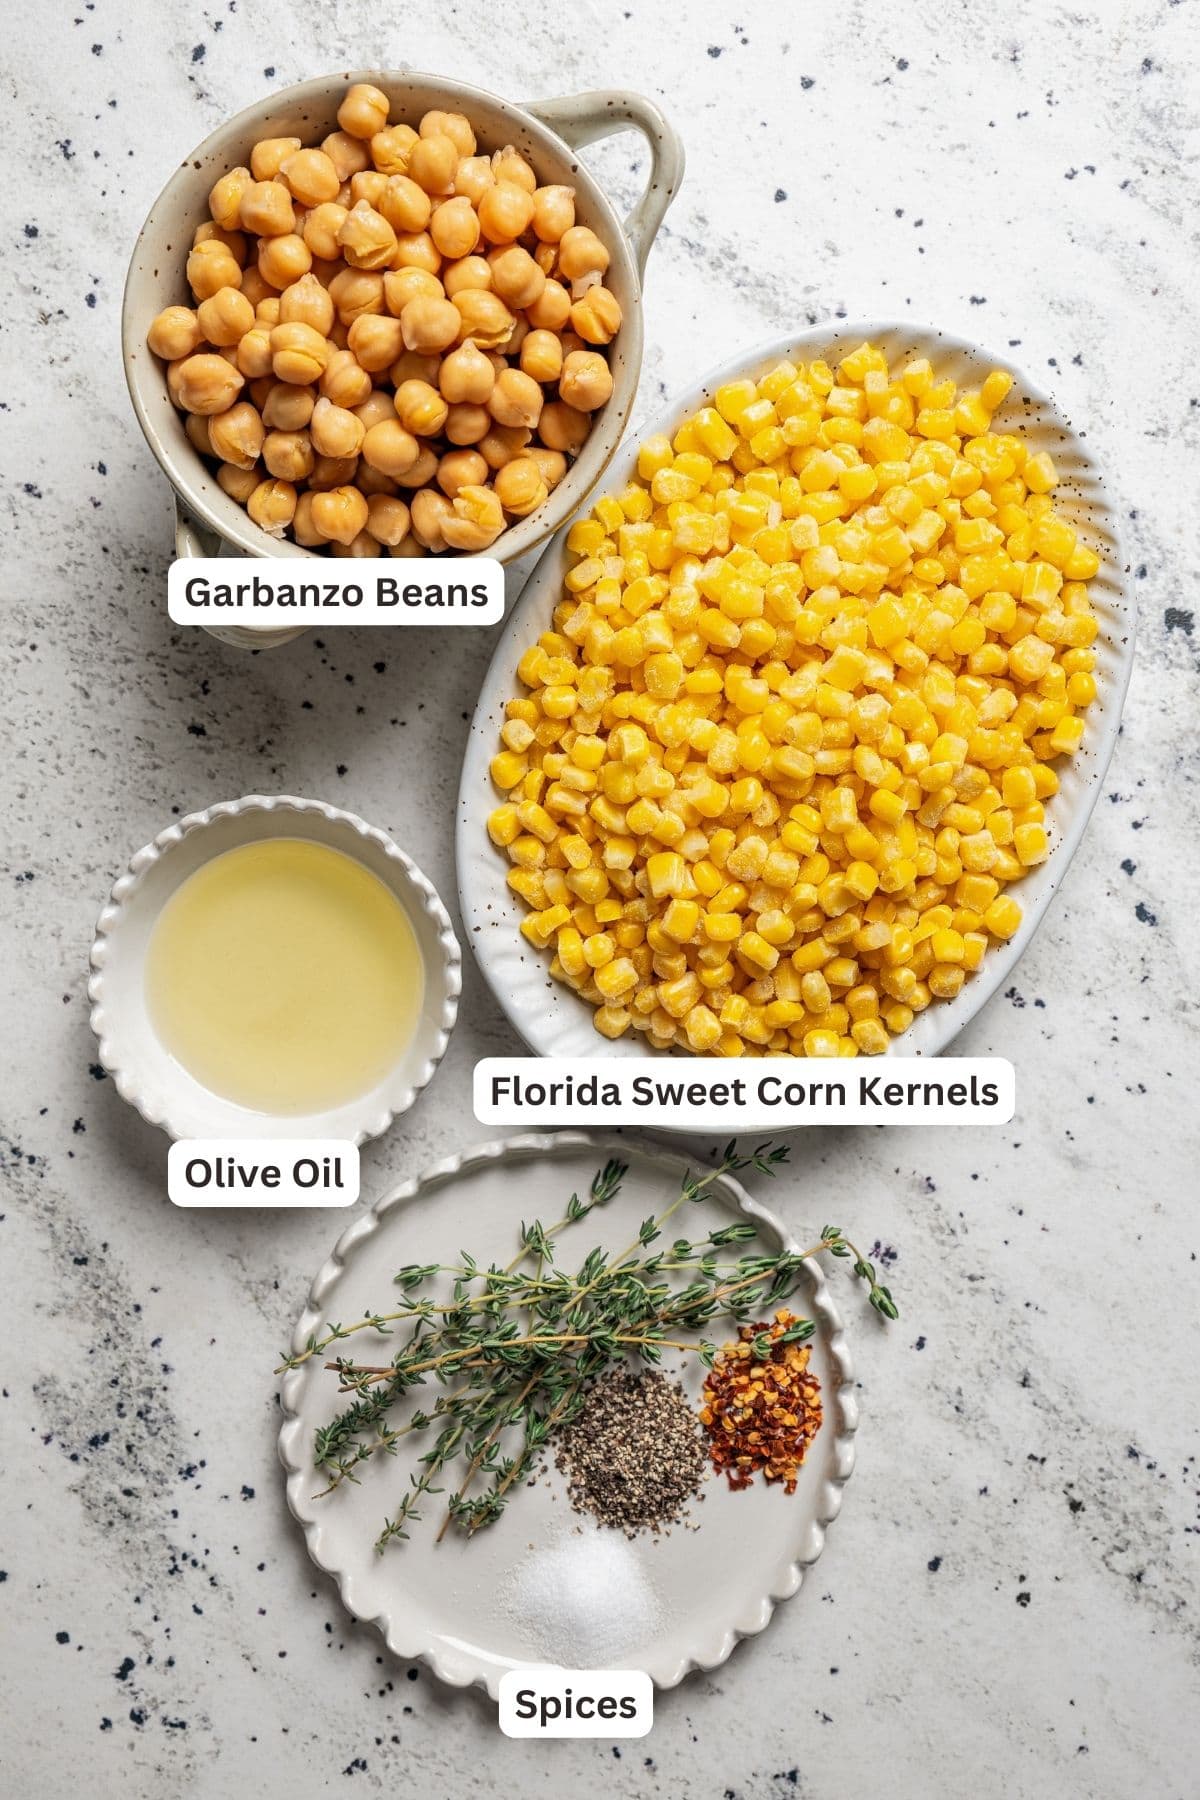 Labeled ingredients for roasted chickpeas and sweet corn.